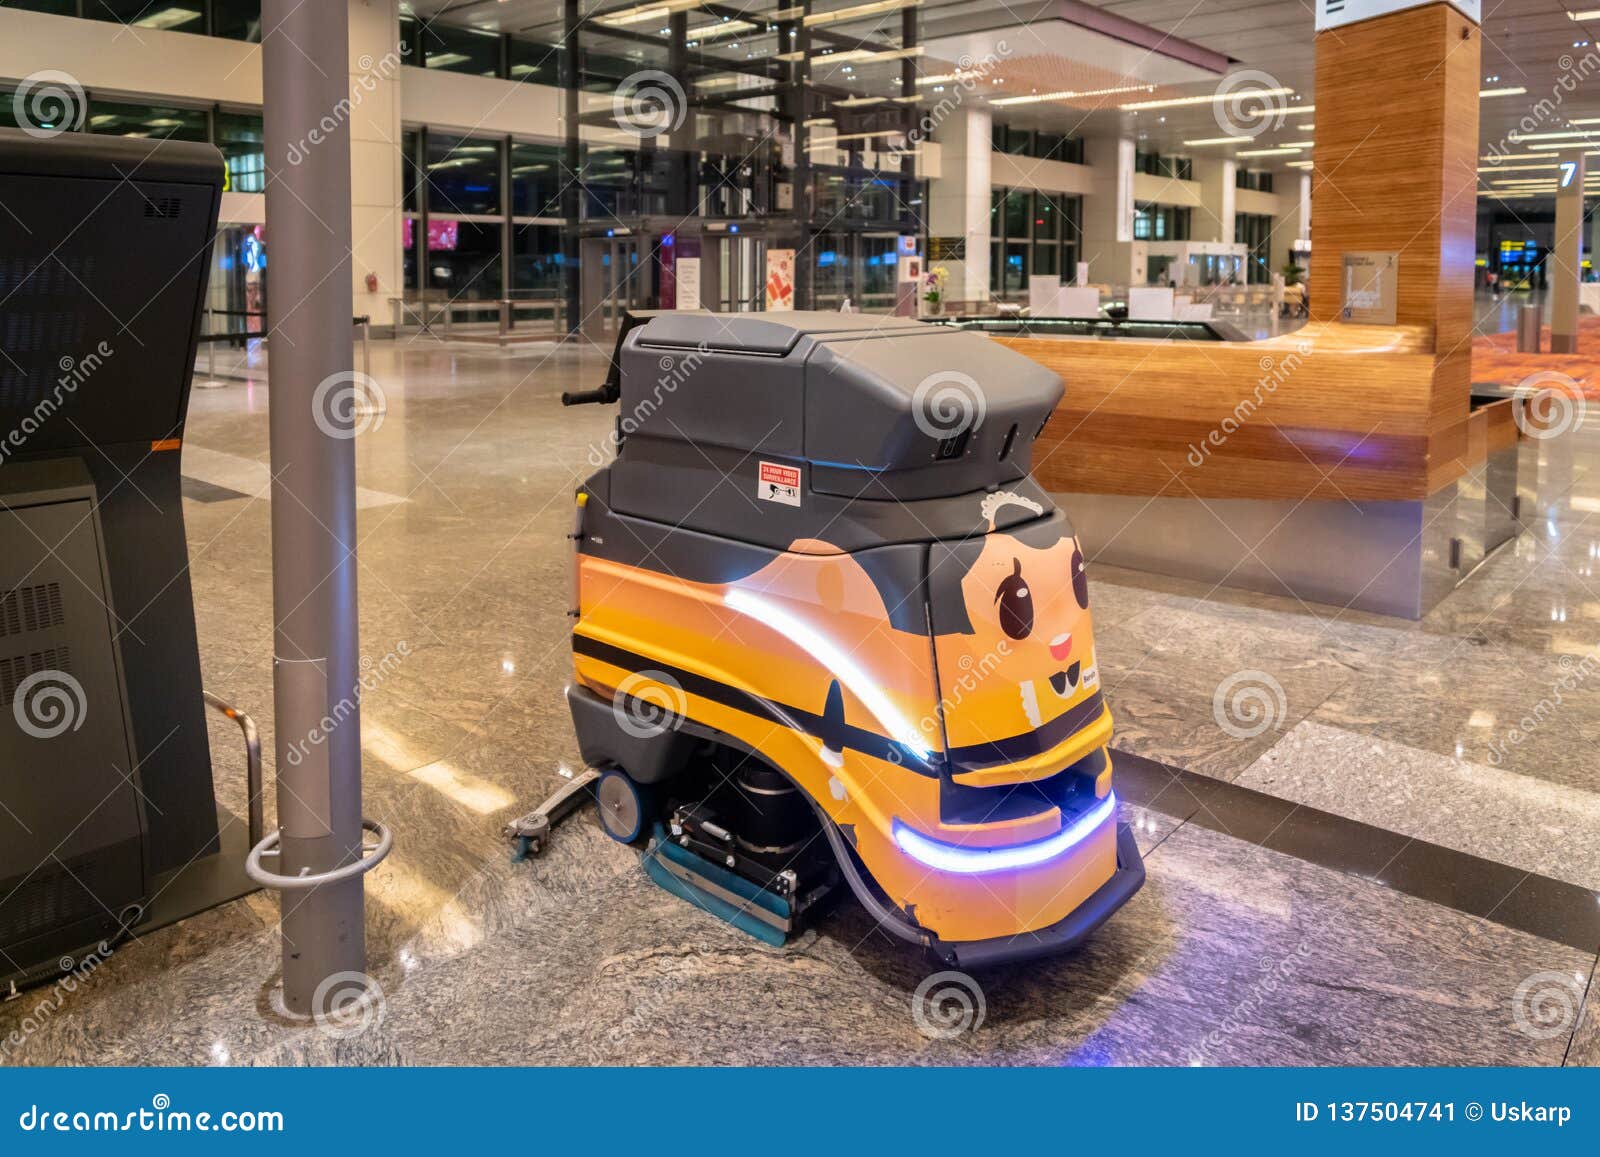 Singapore's Changi Airport Has Contactless Check-In Kiosks and Cleaning  Robots